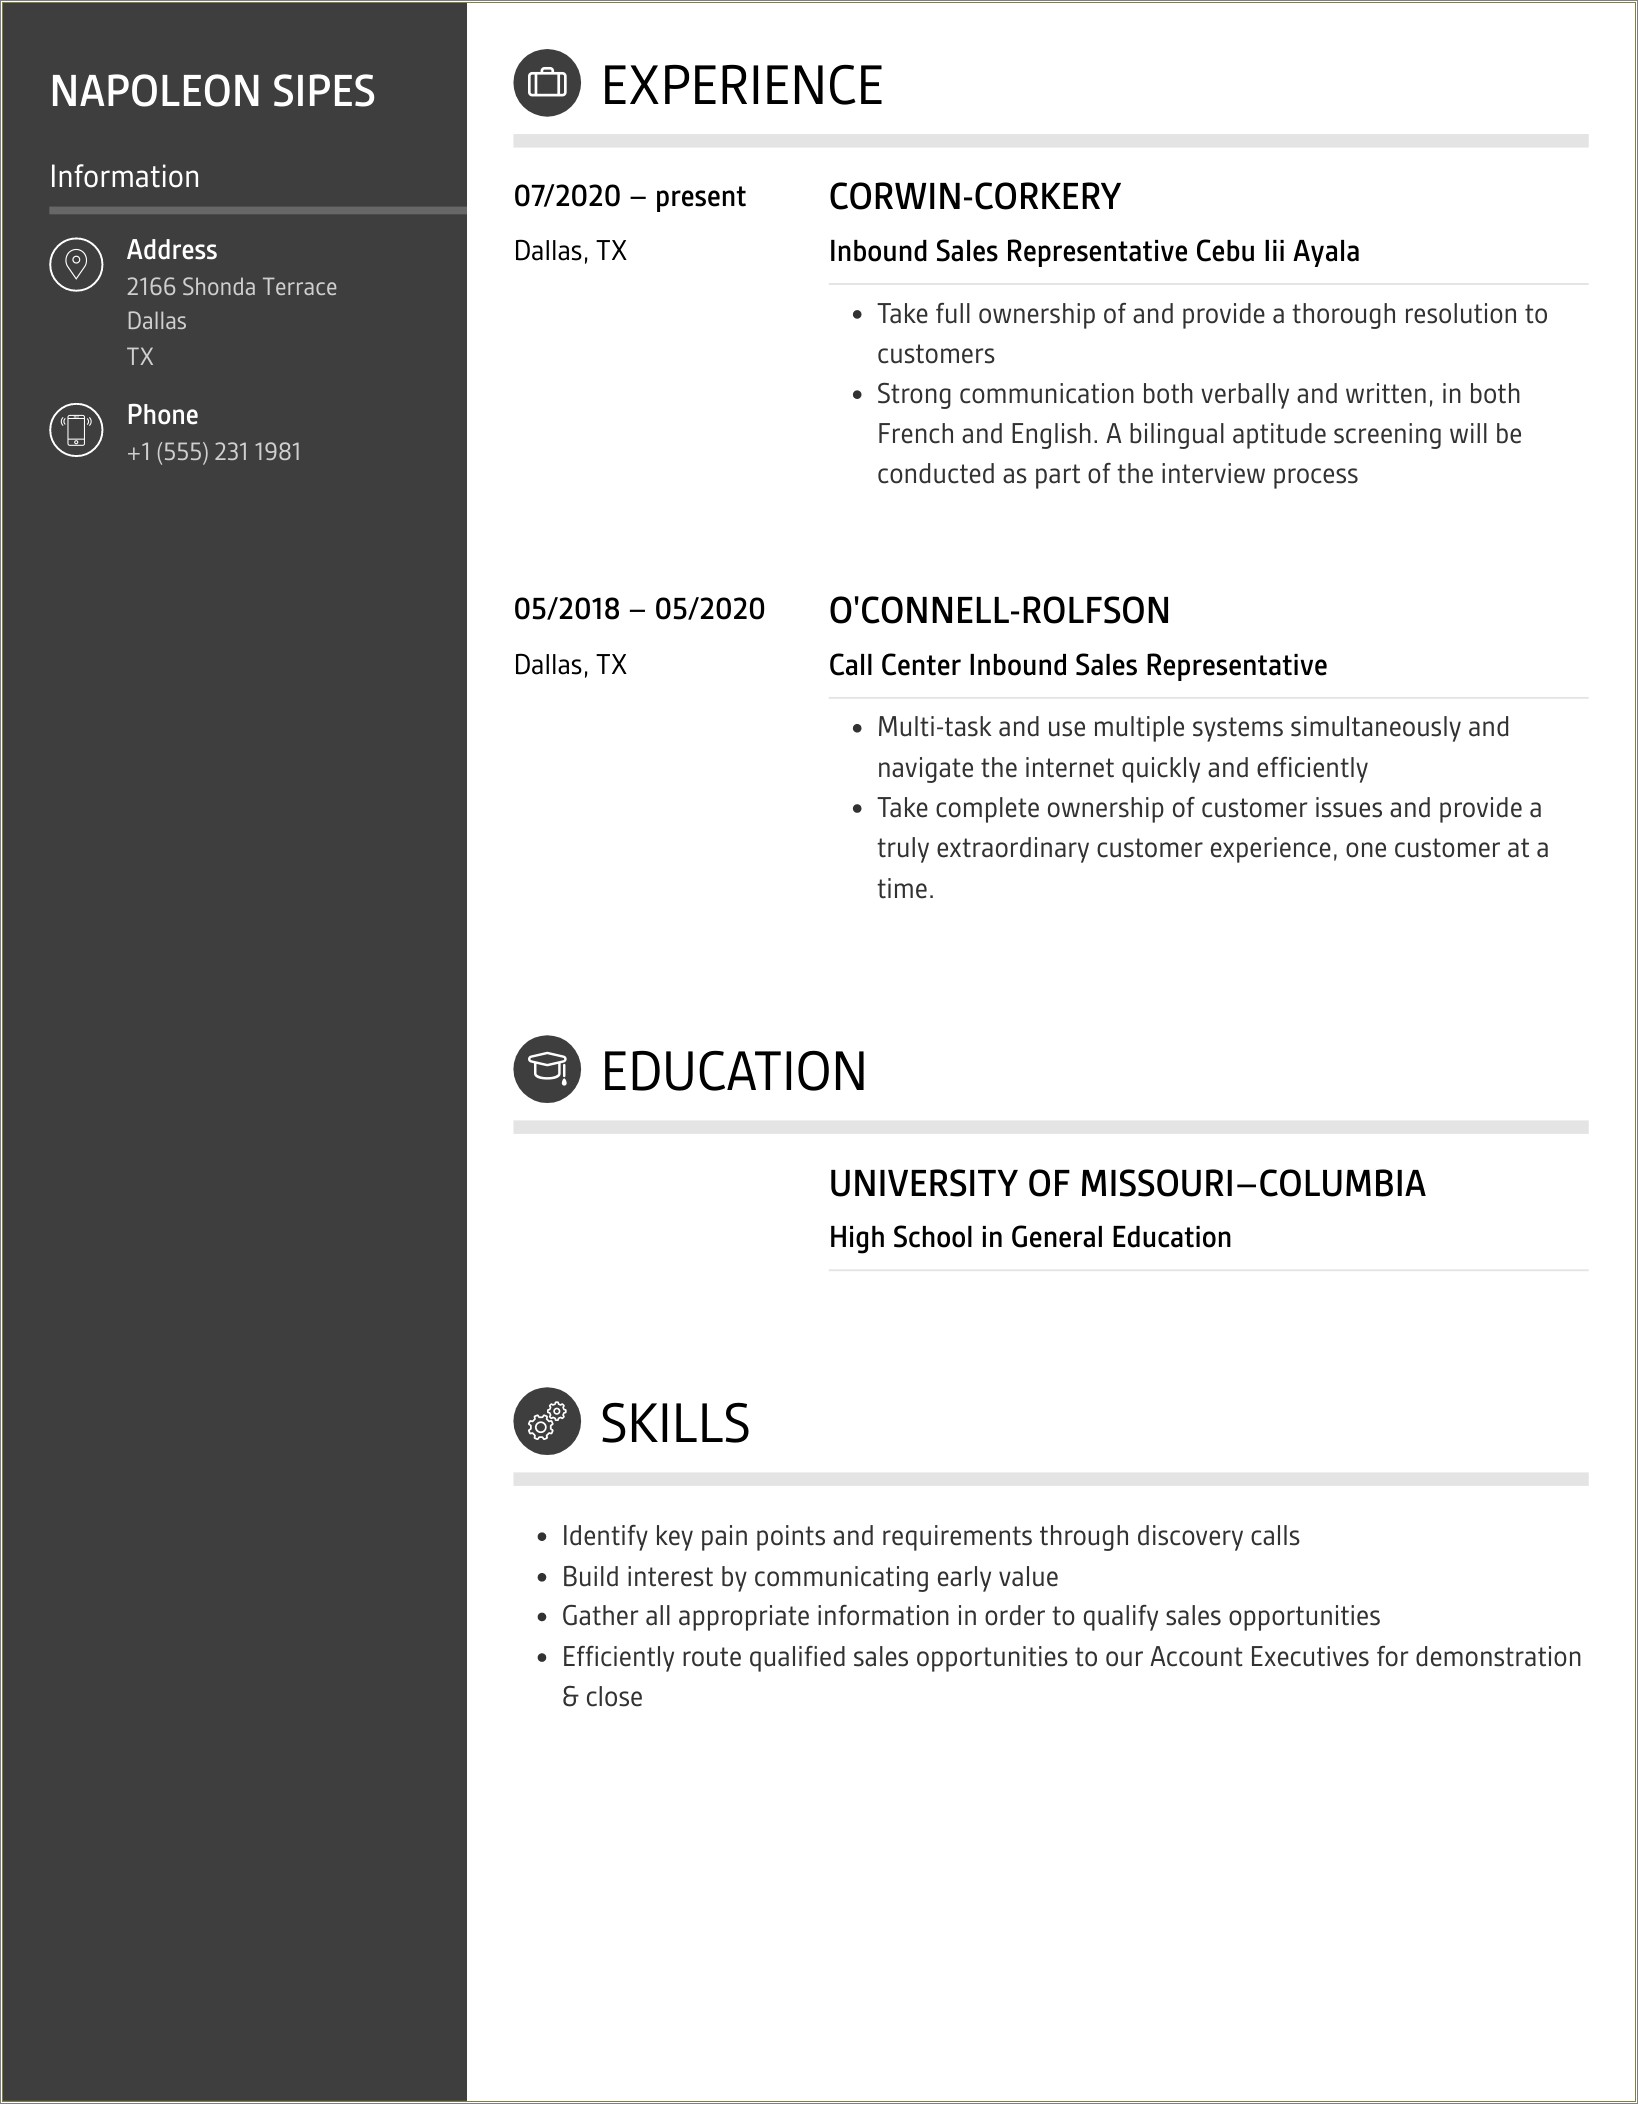 Comcast Business Inbound Sales Rep Resume Examples